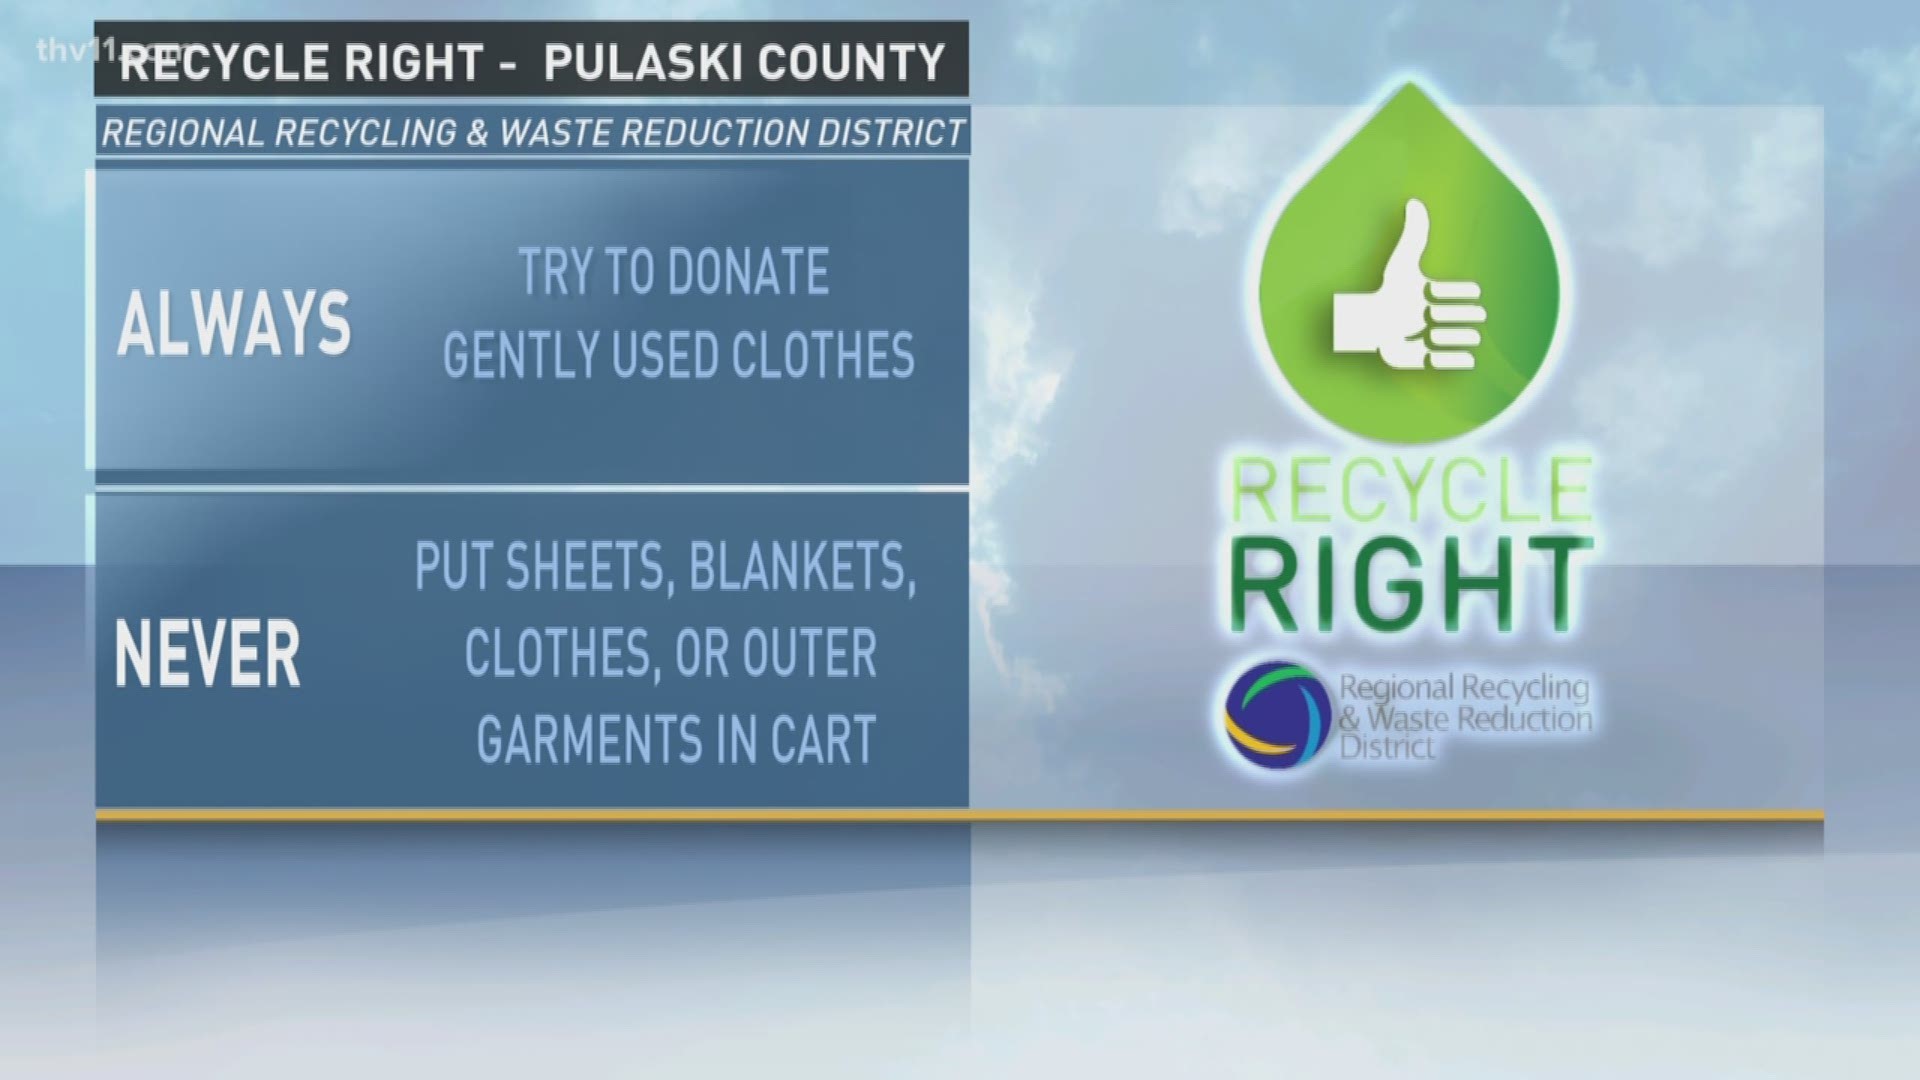 Meteorologist Mariel Ruiz gives us our week 6 tip for the Recycle Right campaign.